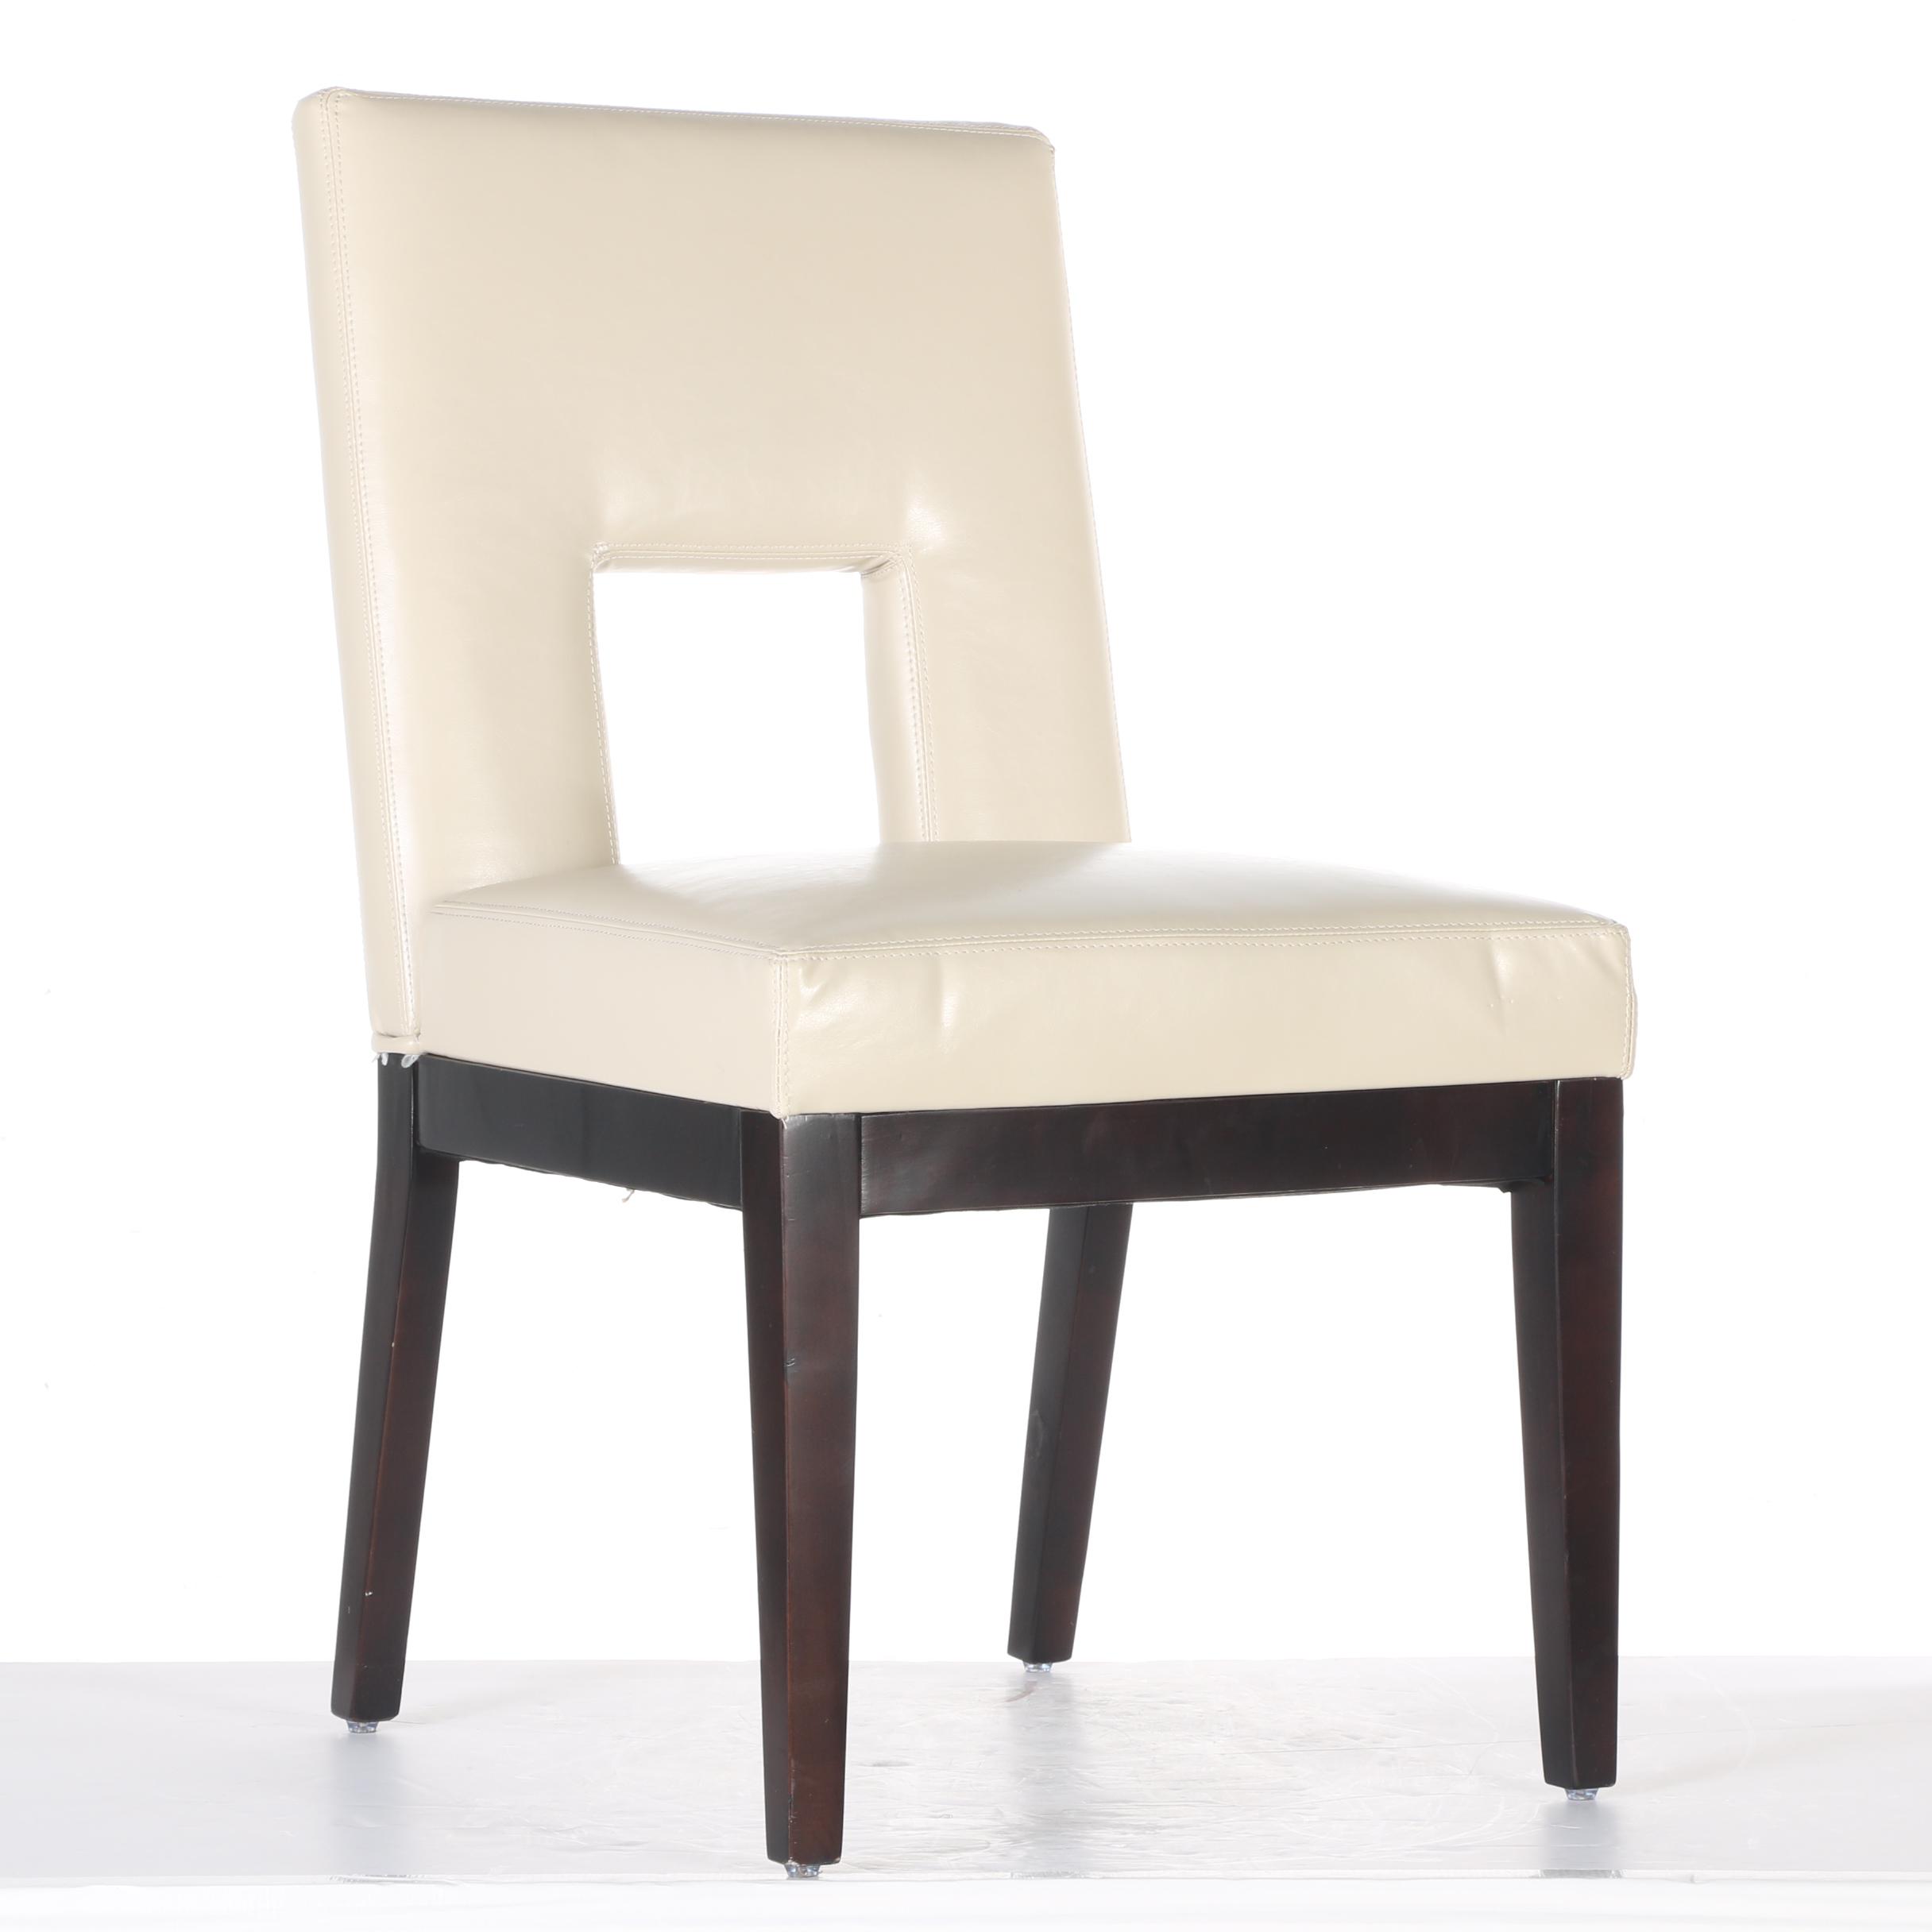 pier 1 leather chair